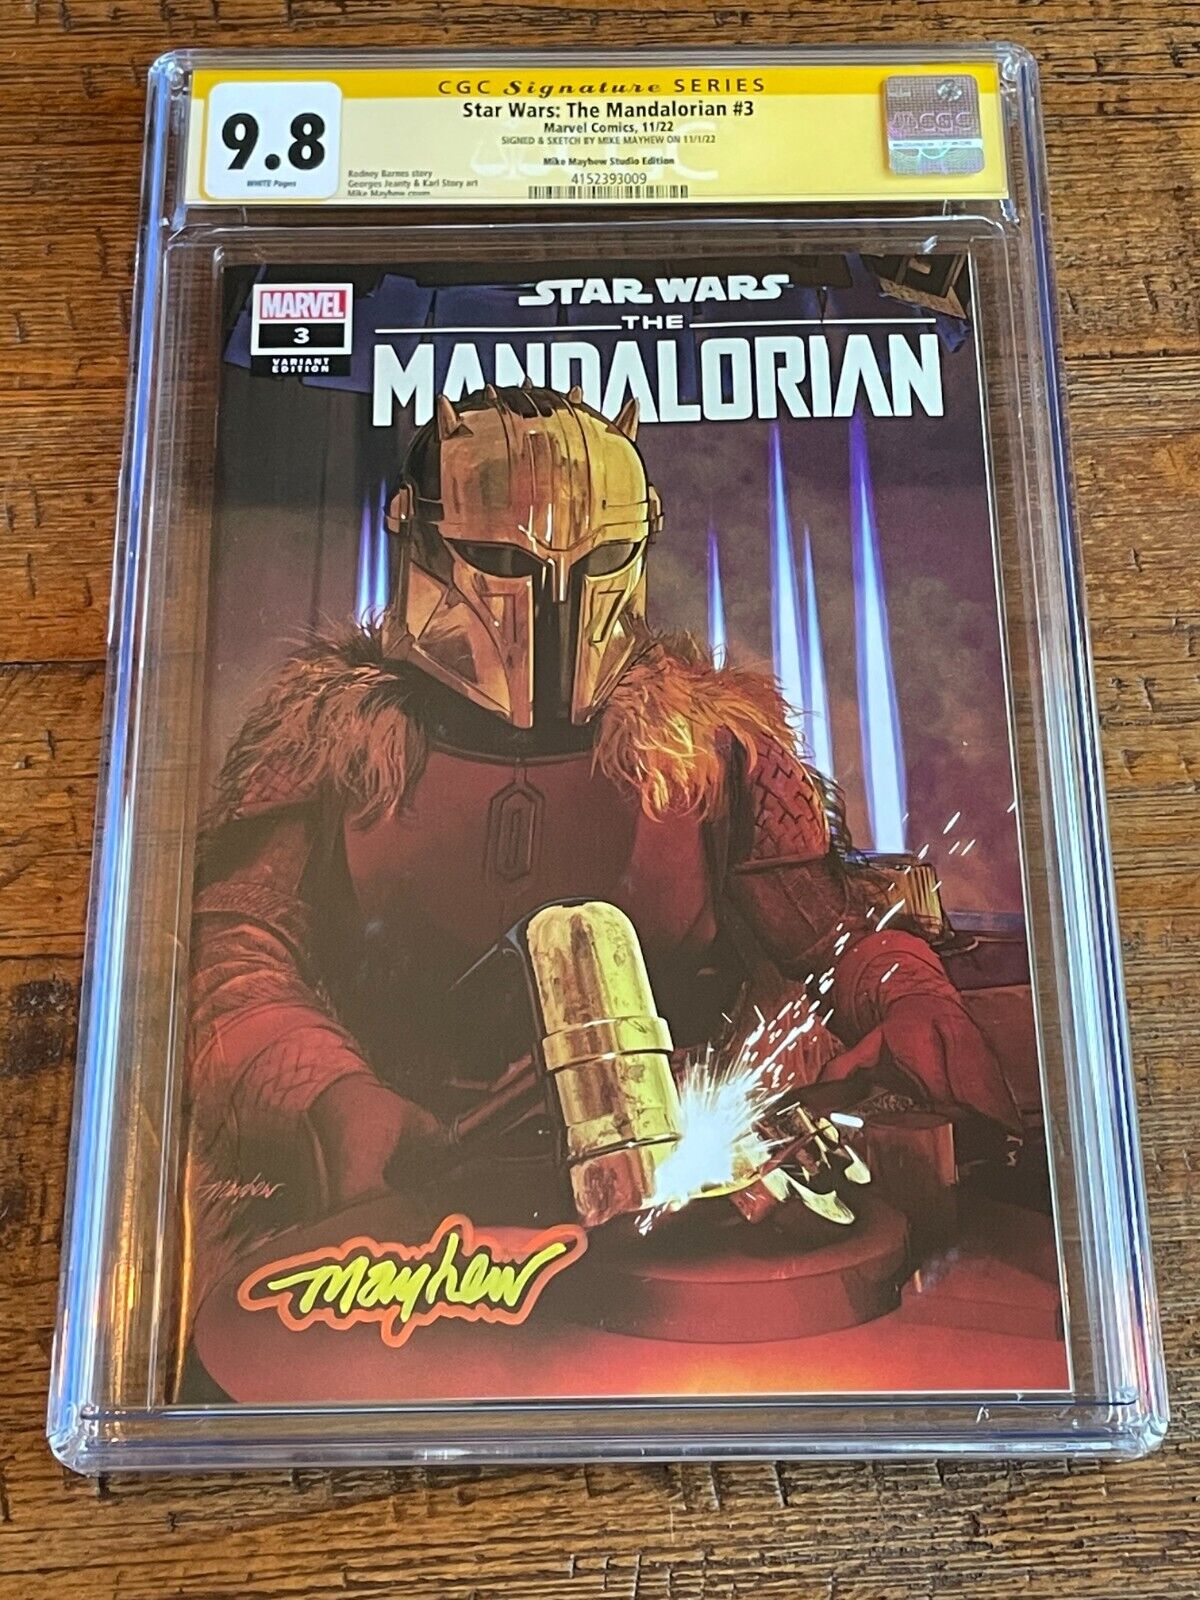 STAR WARS THE MANDALORIAN #3 CGC SS 9.8 MIKE MAYHEW SIGNED EXCL VARIANT LIMITED TO 800